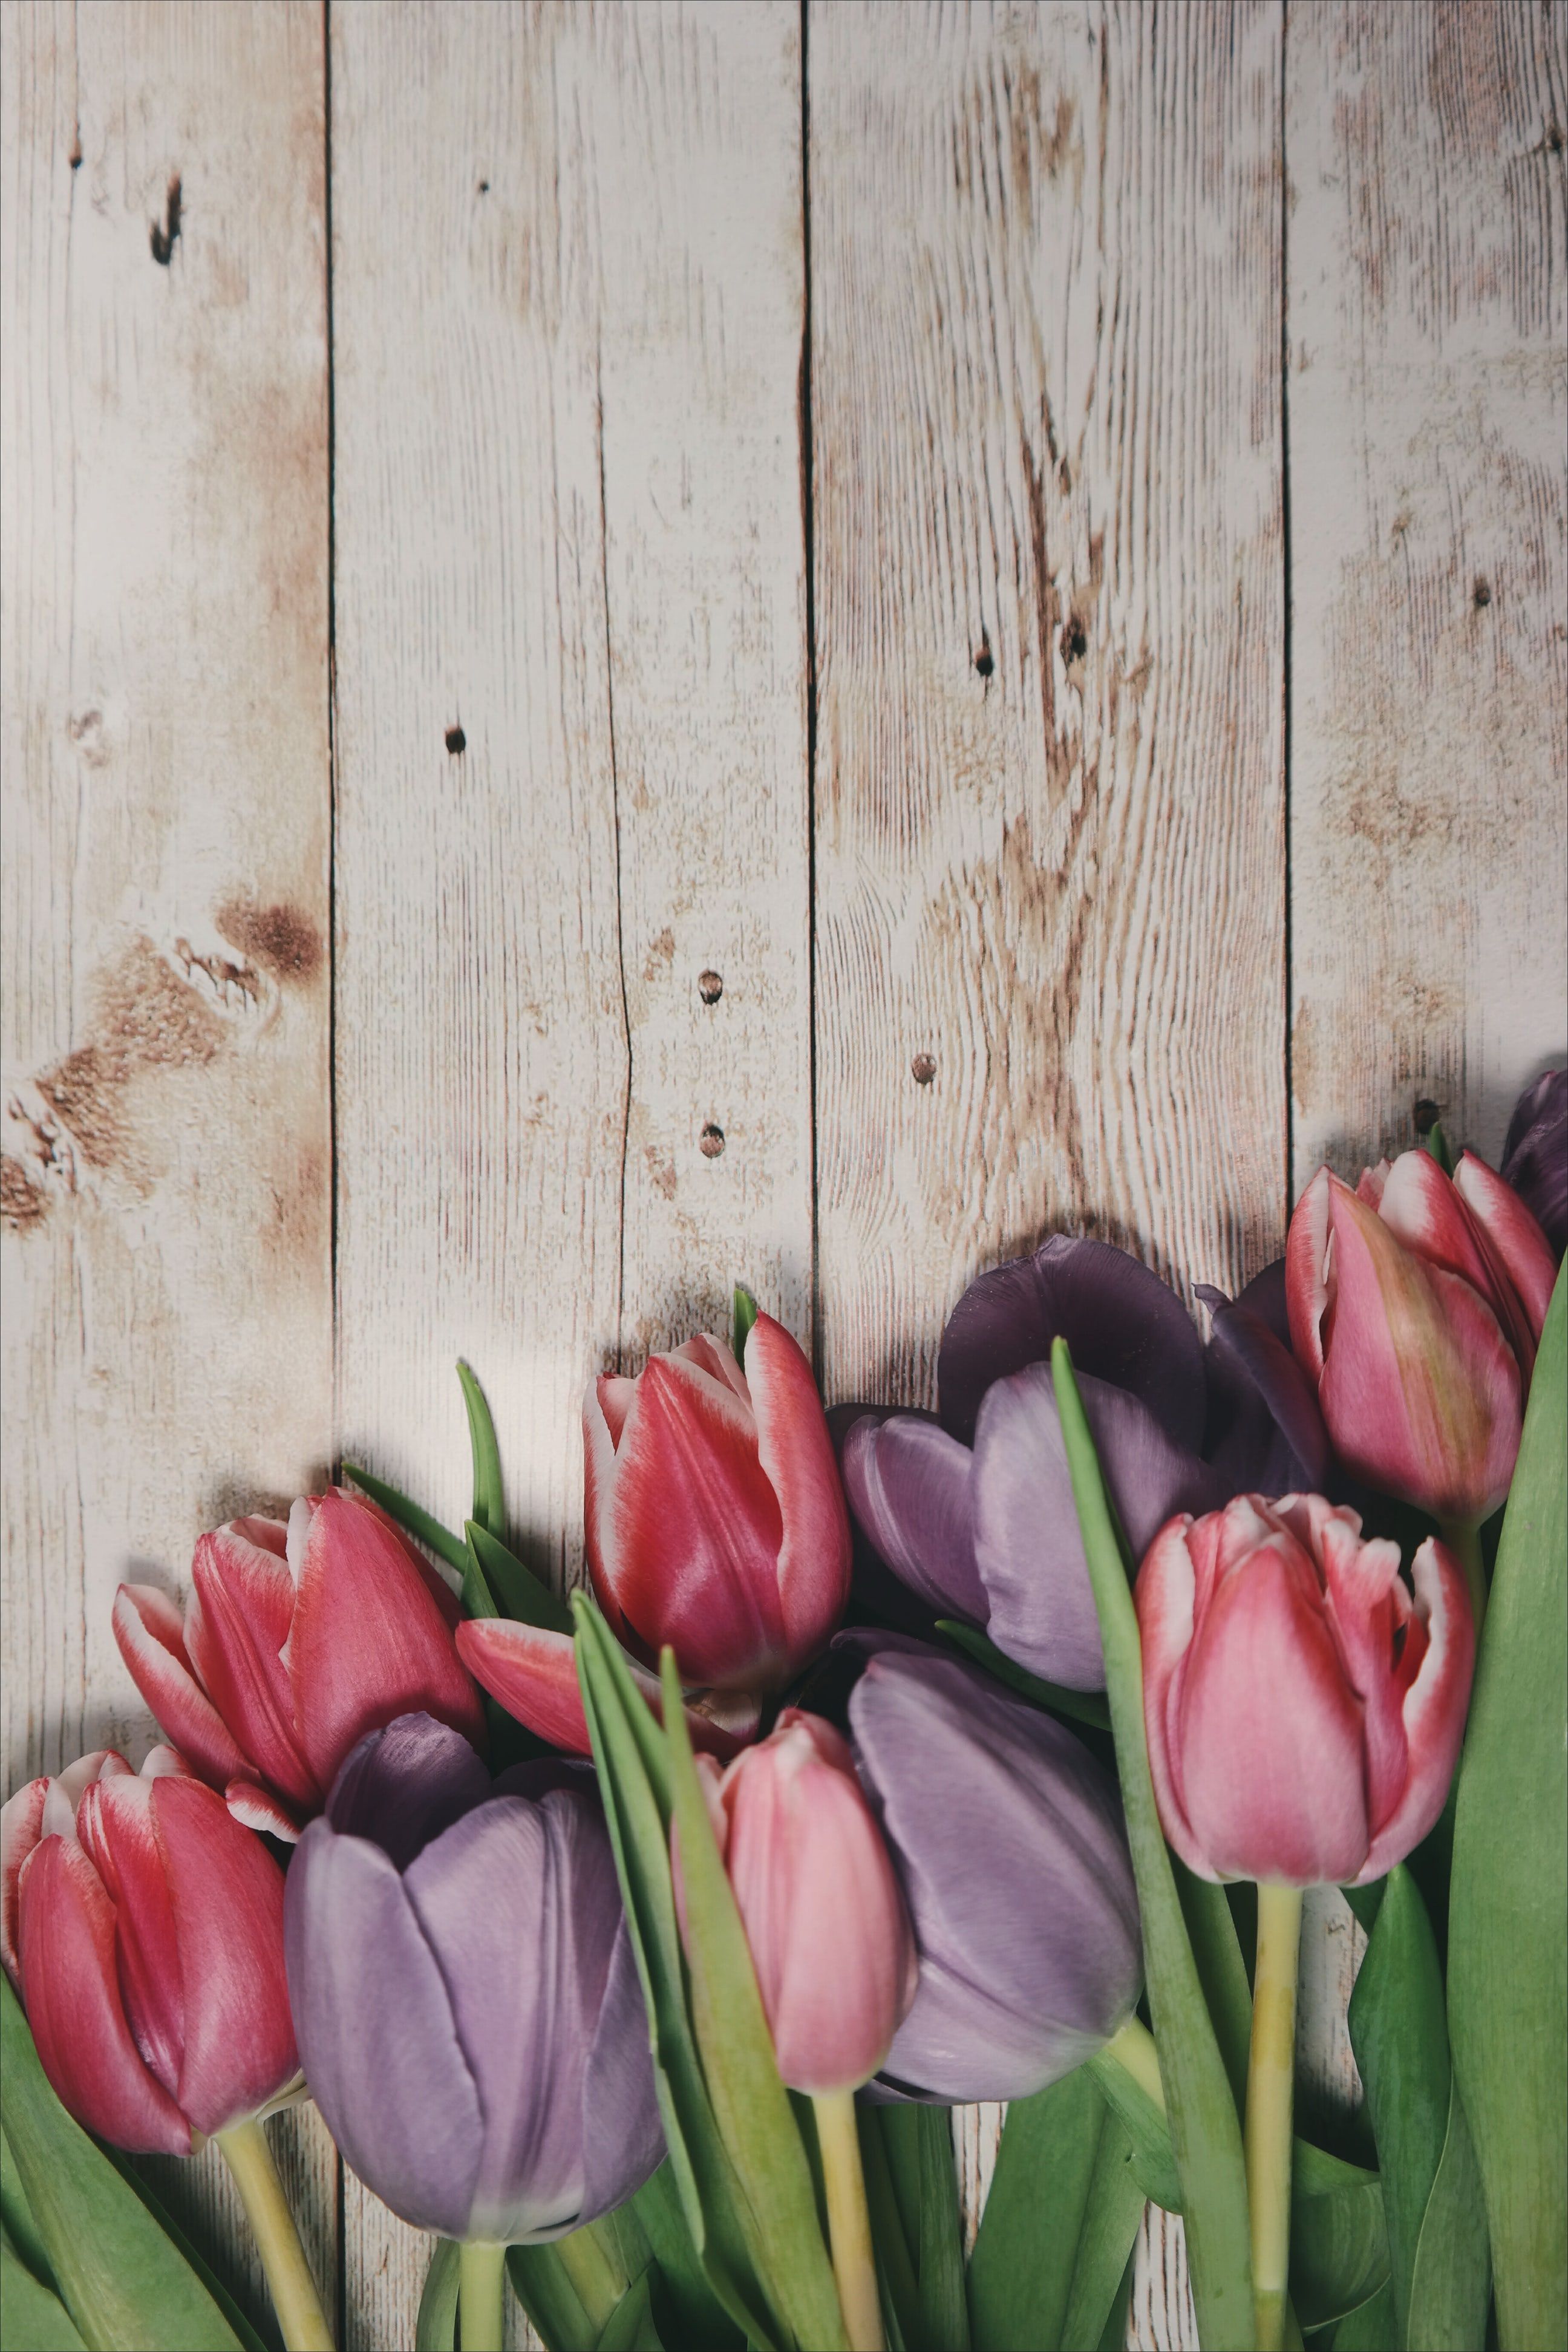 Macro shot of pink tulips on a wooden deck. Flower